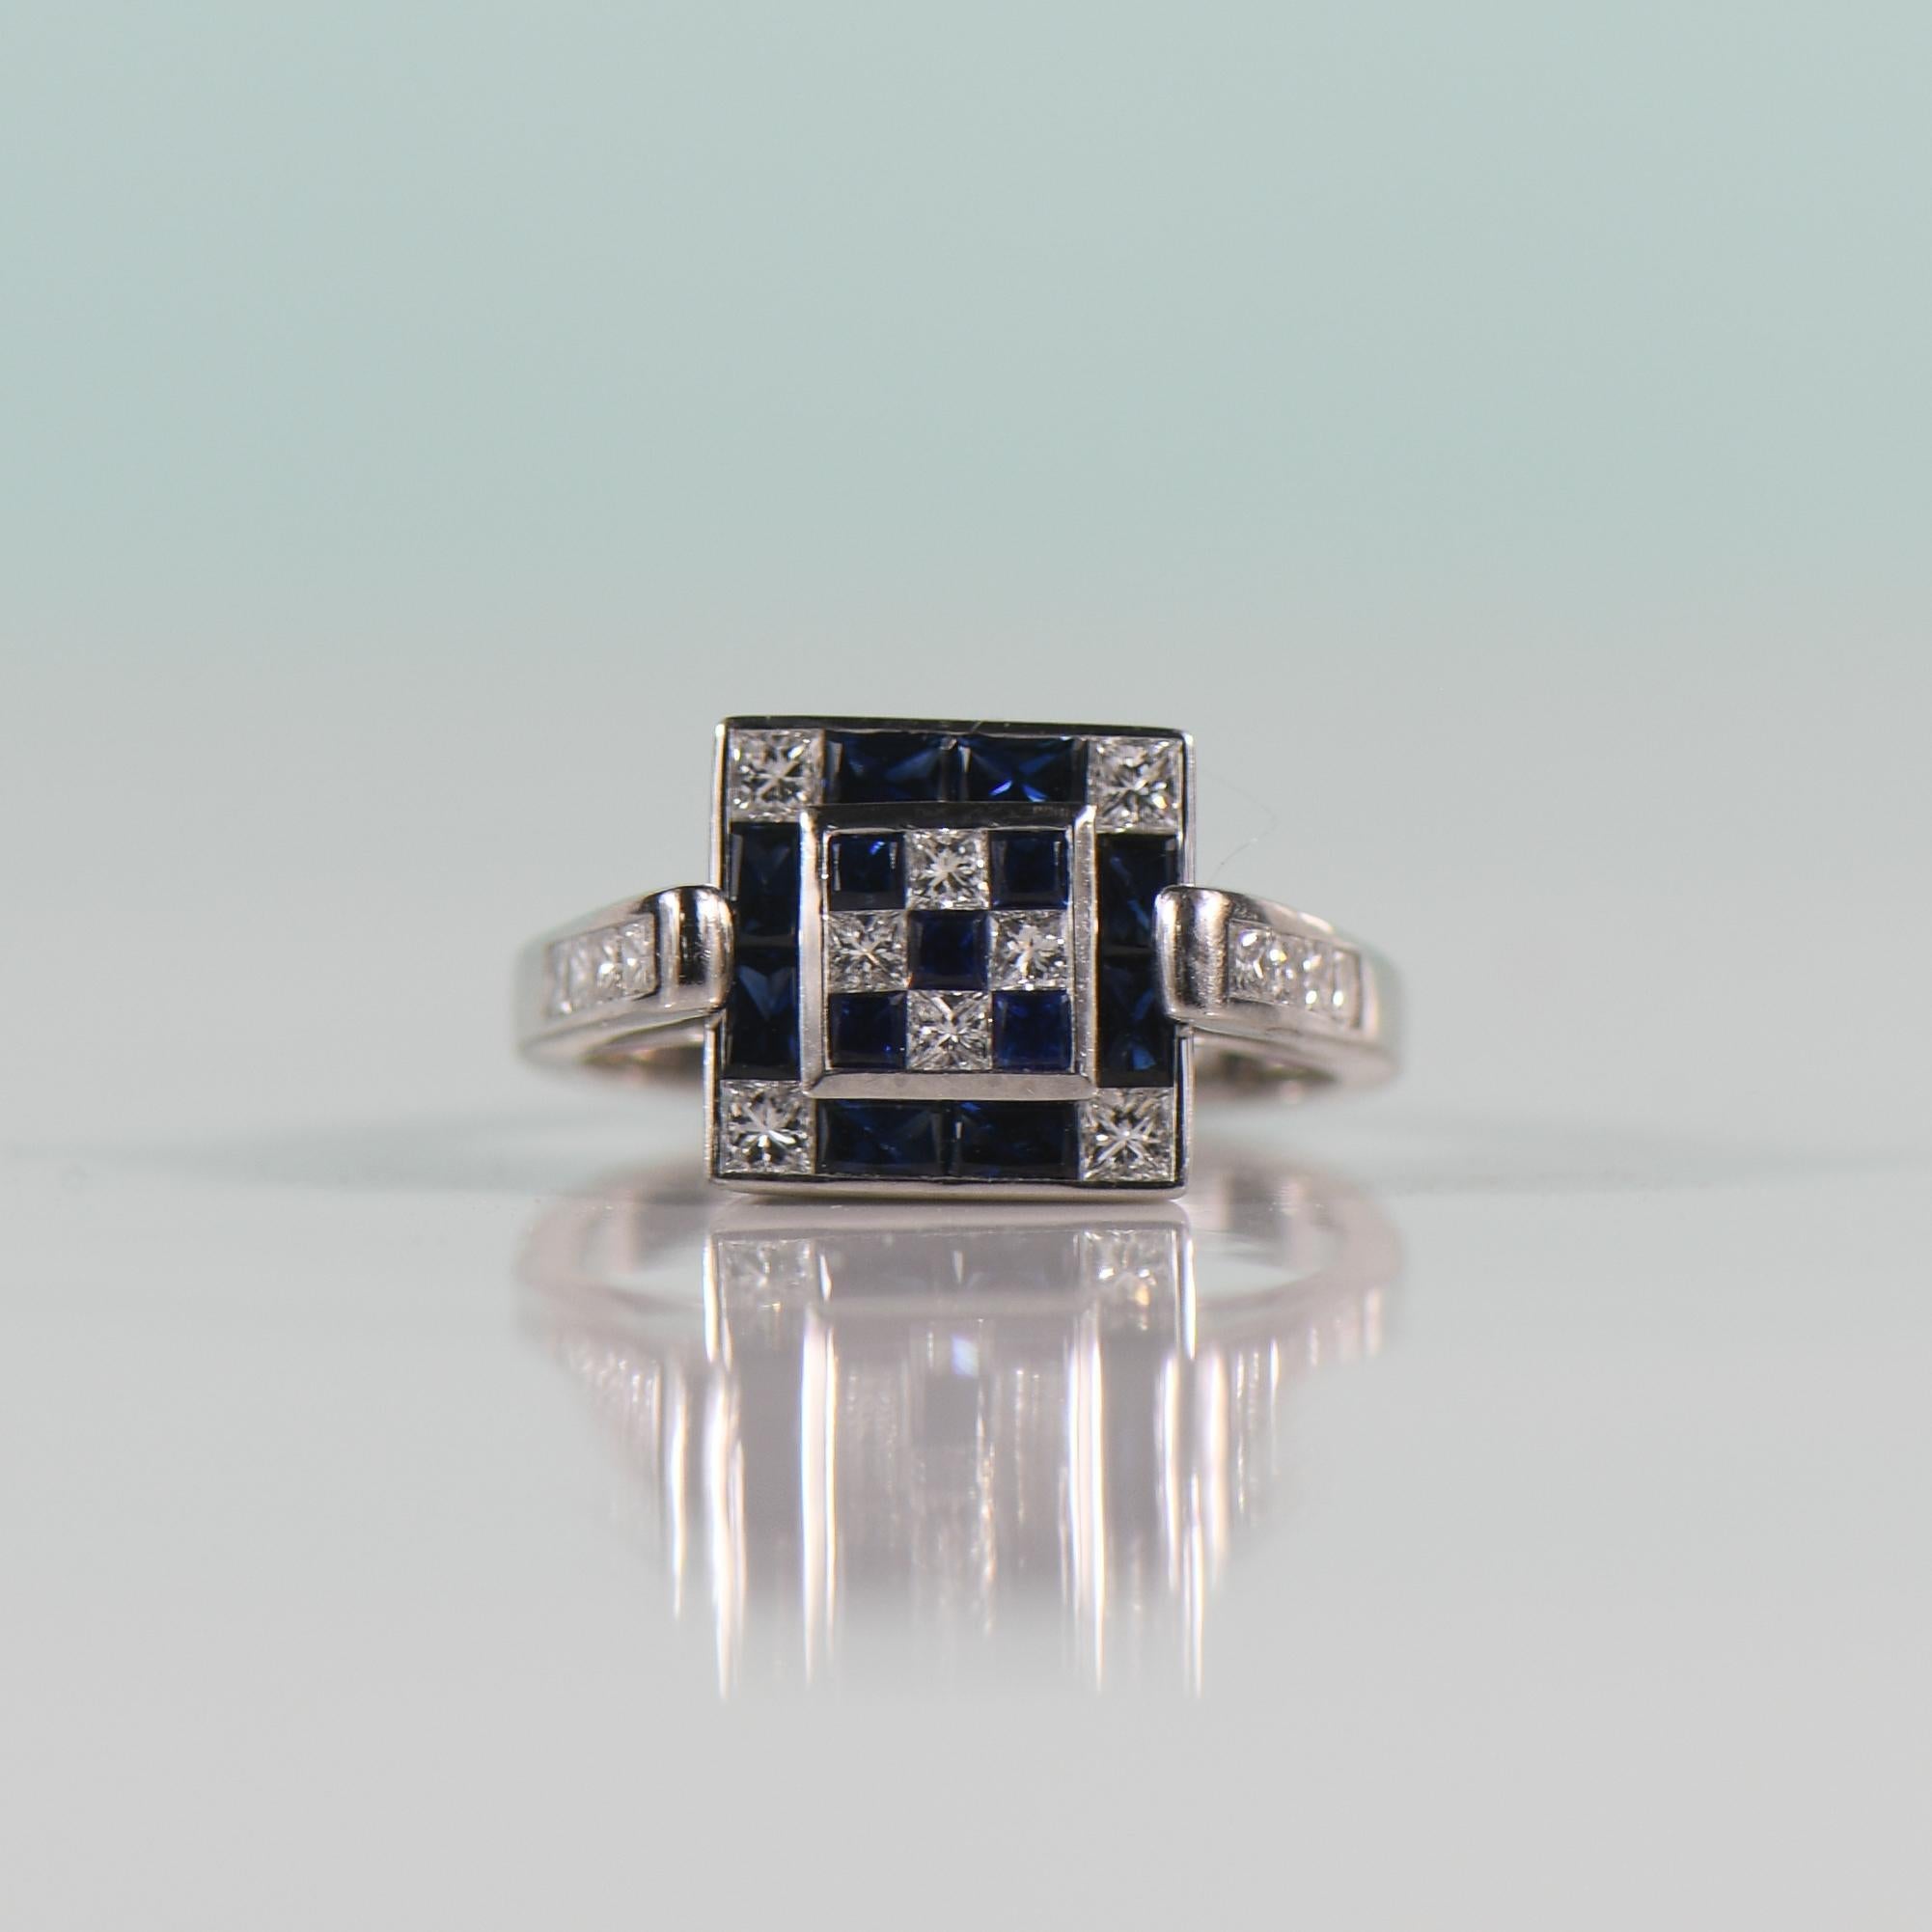 Indulge in modern elegance with this cathedral shoulder diamond and sapphire ring, a captivating union of sophistication and contemporary design. Crafted in luxurious 18k white gold, the invisible setting seamlessly melds princess cut sapphires and